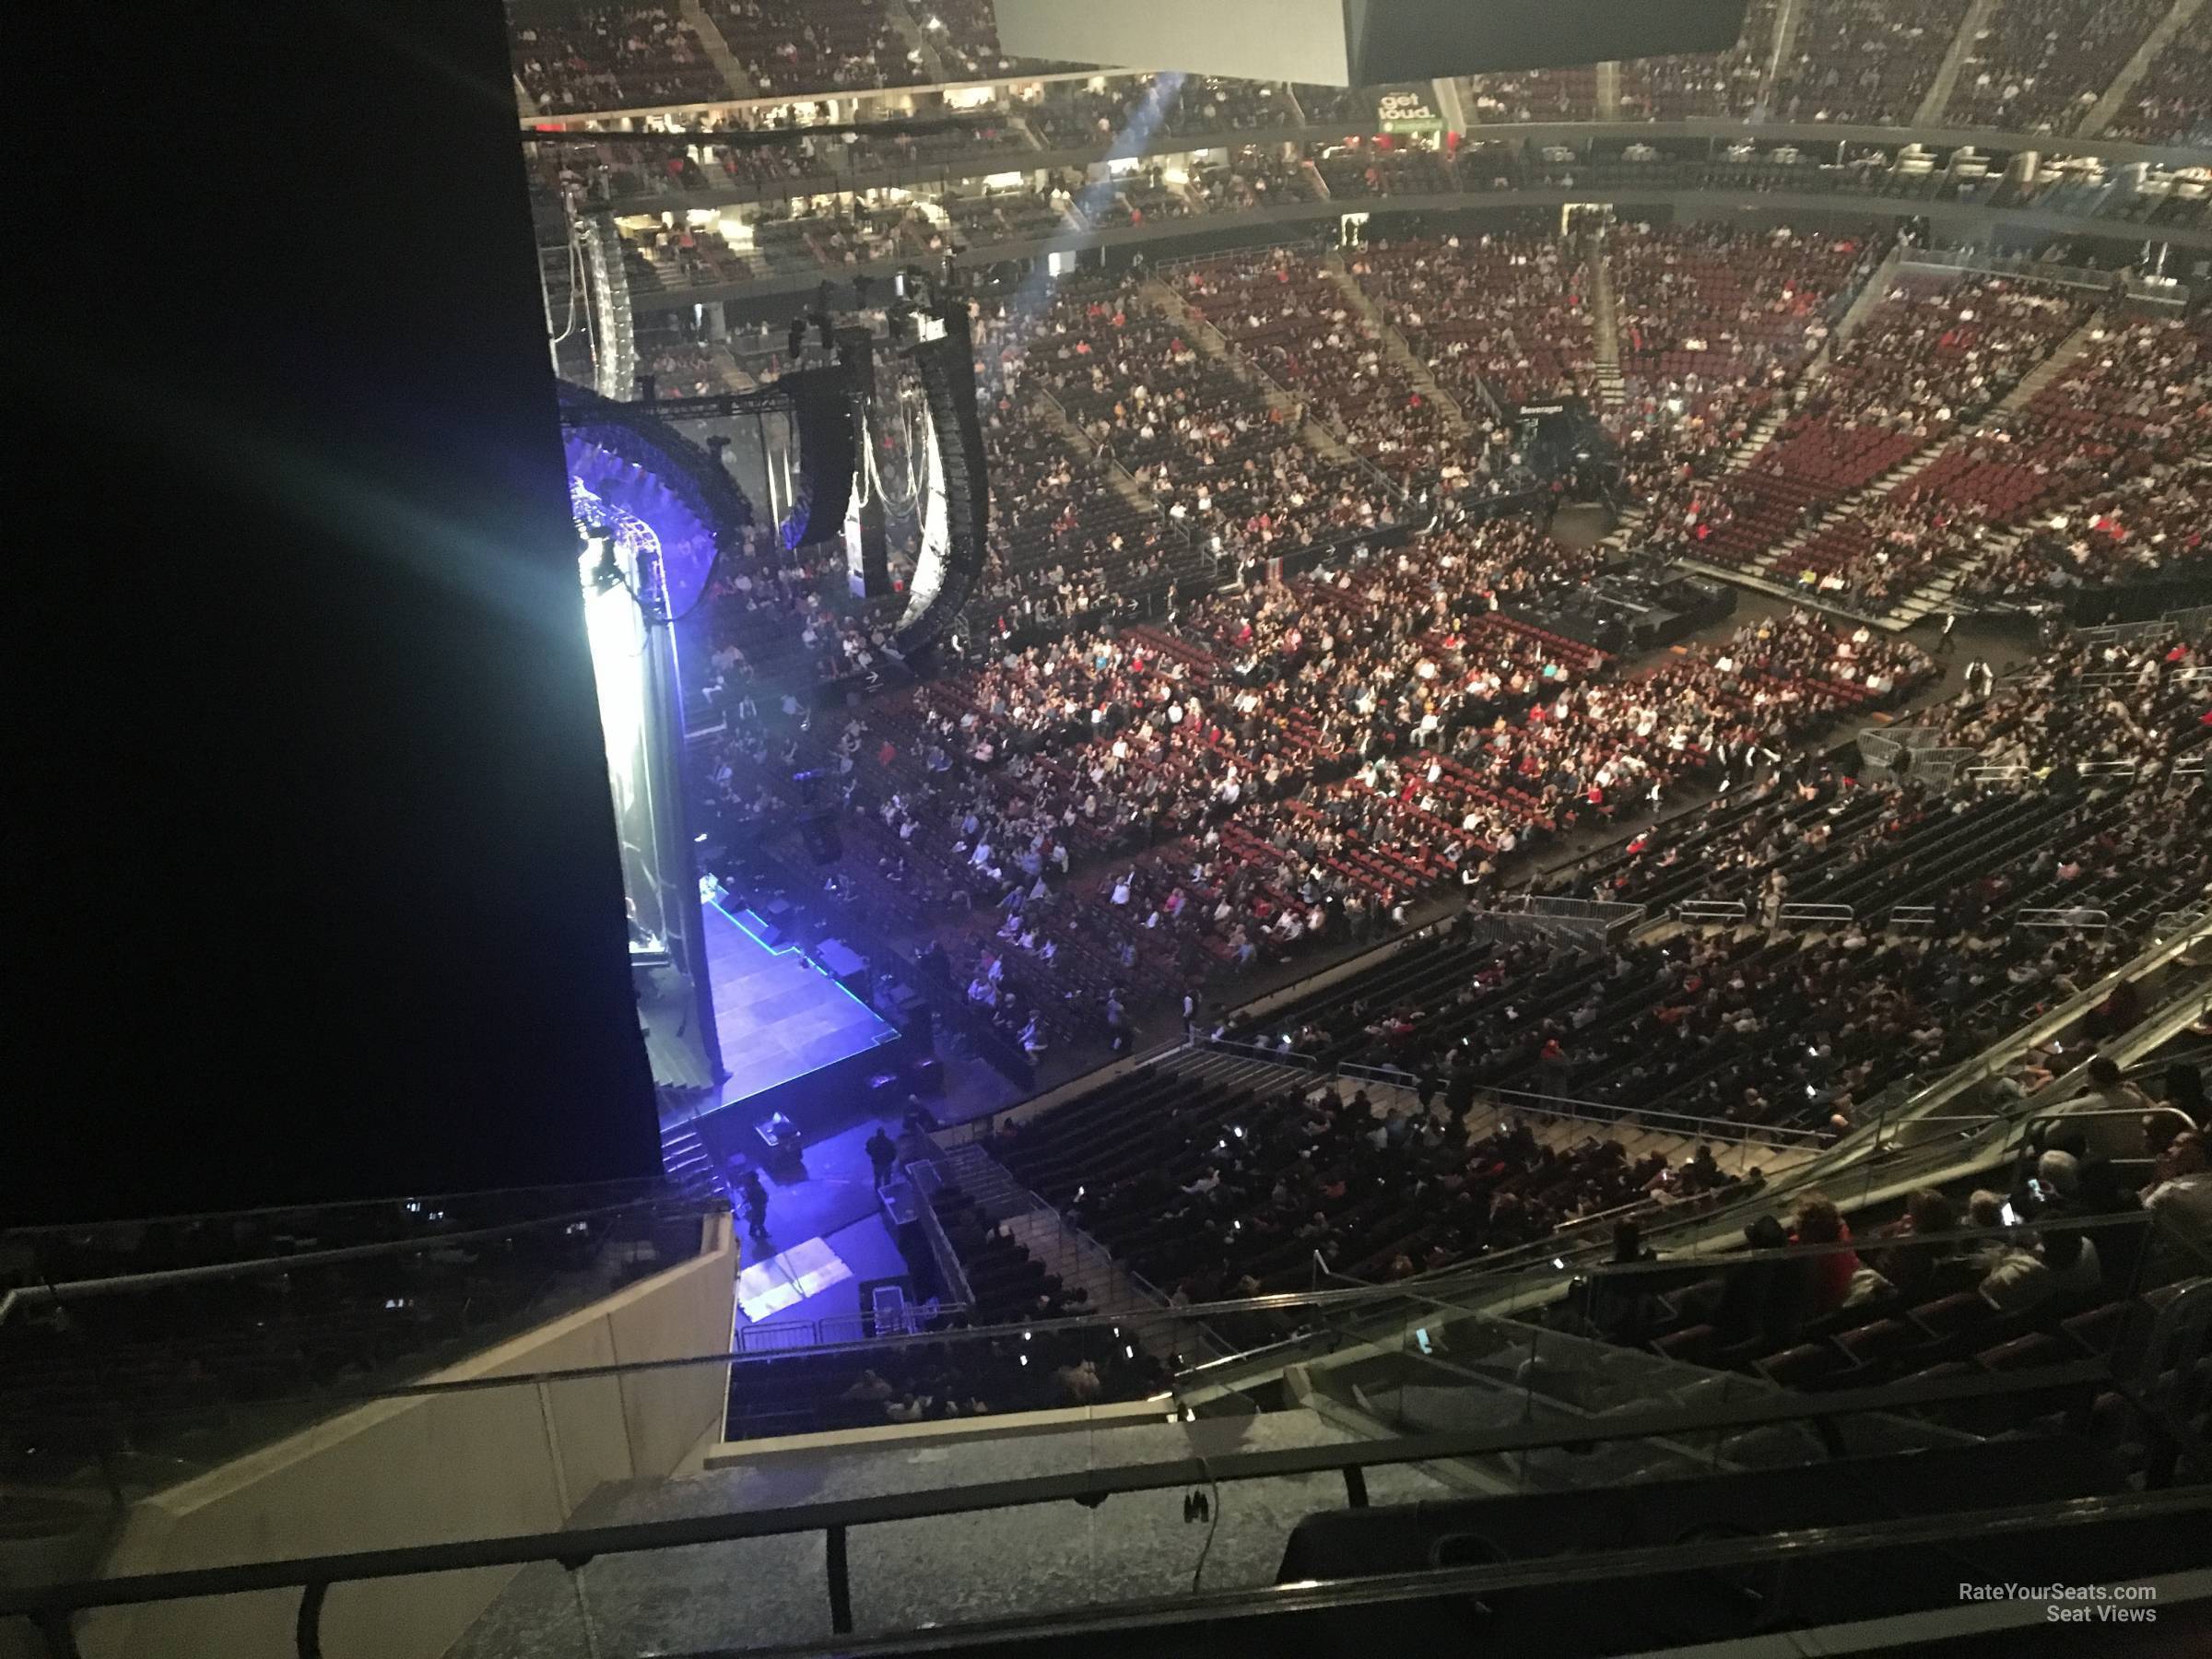 Prudential Seating Chart View